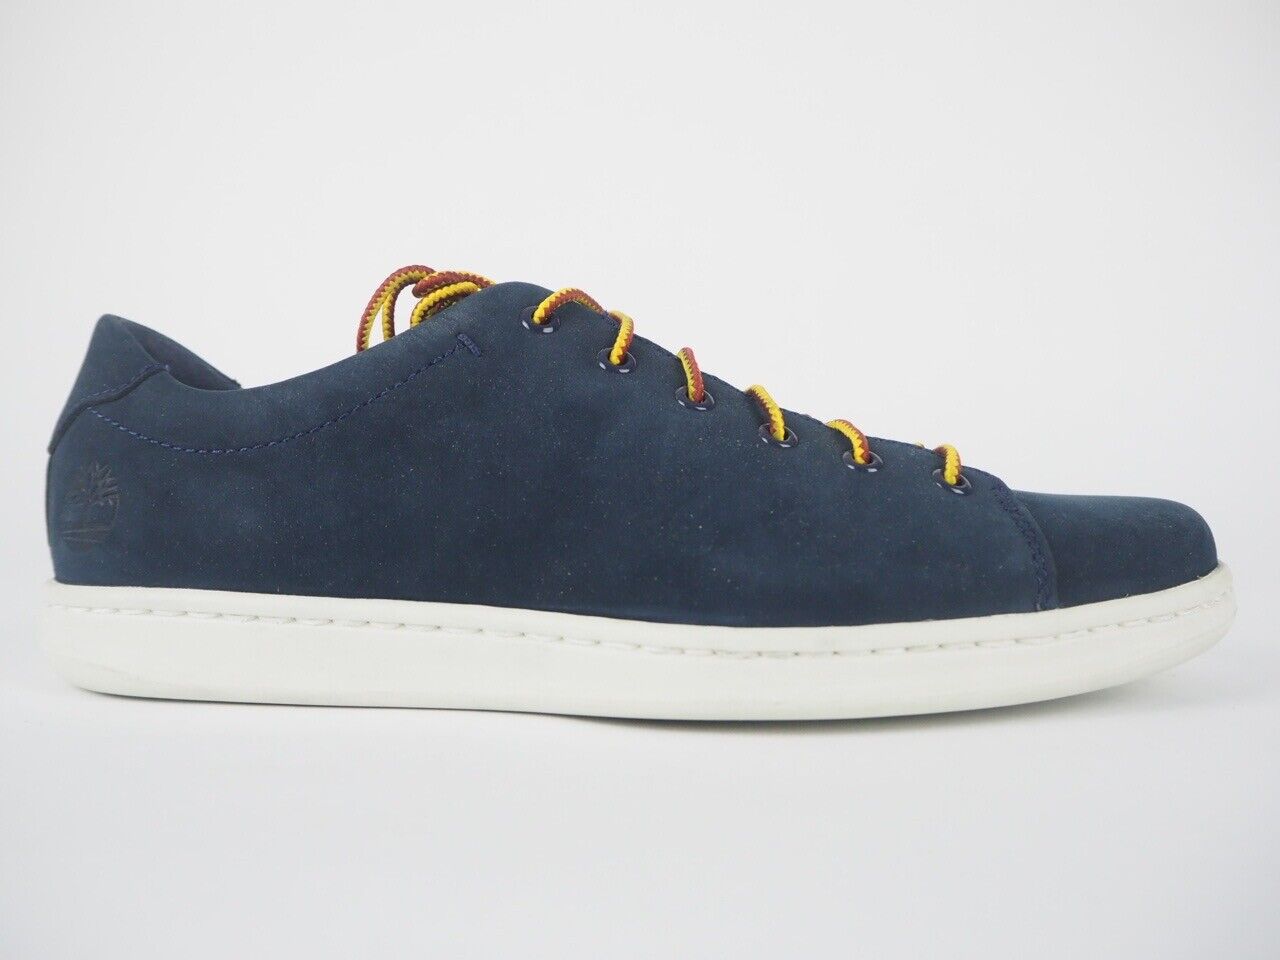 Mens Timberland Court Side Oxford A1GJ2 Navy Leather Lace Up Trainers - London Top Style